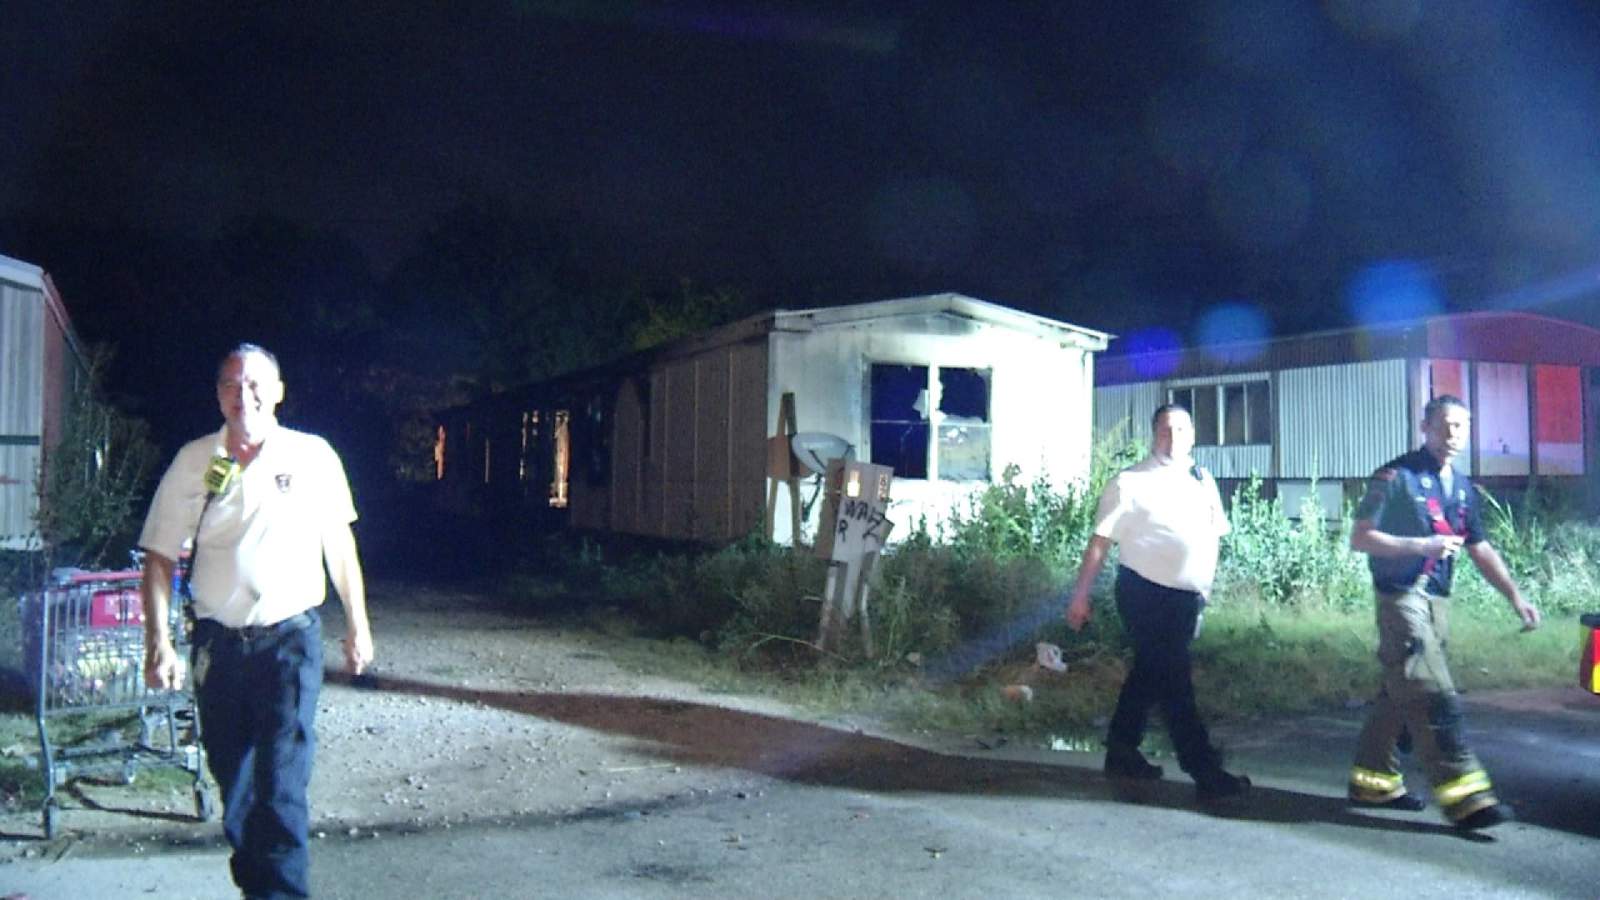 Fire in abandoned trailer seems suspicious, firefighters say